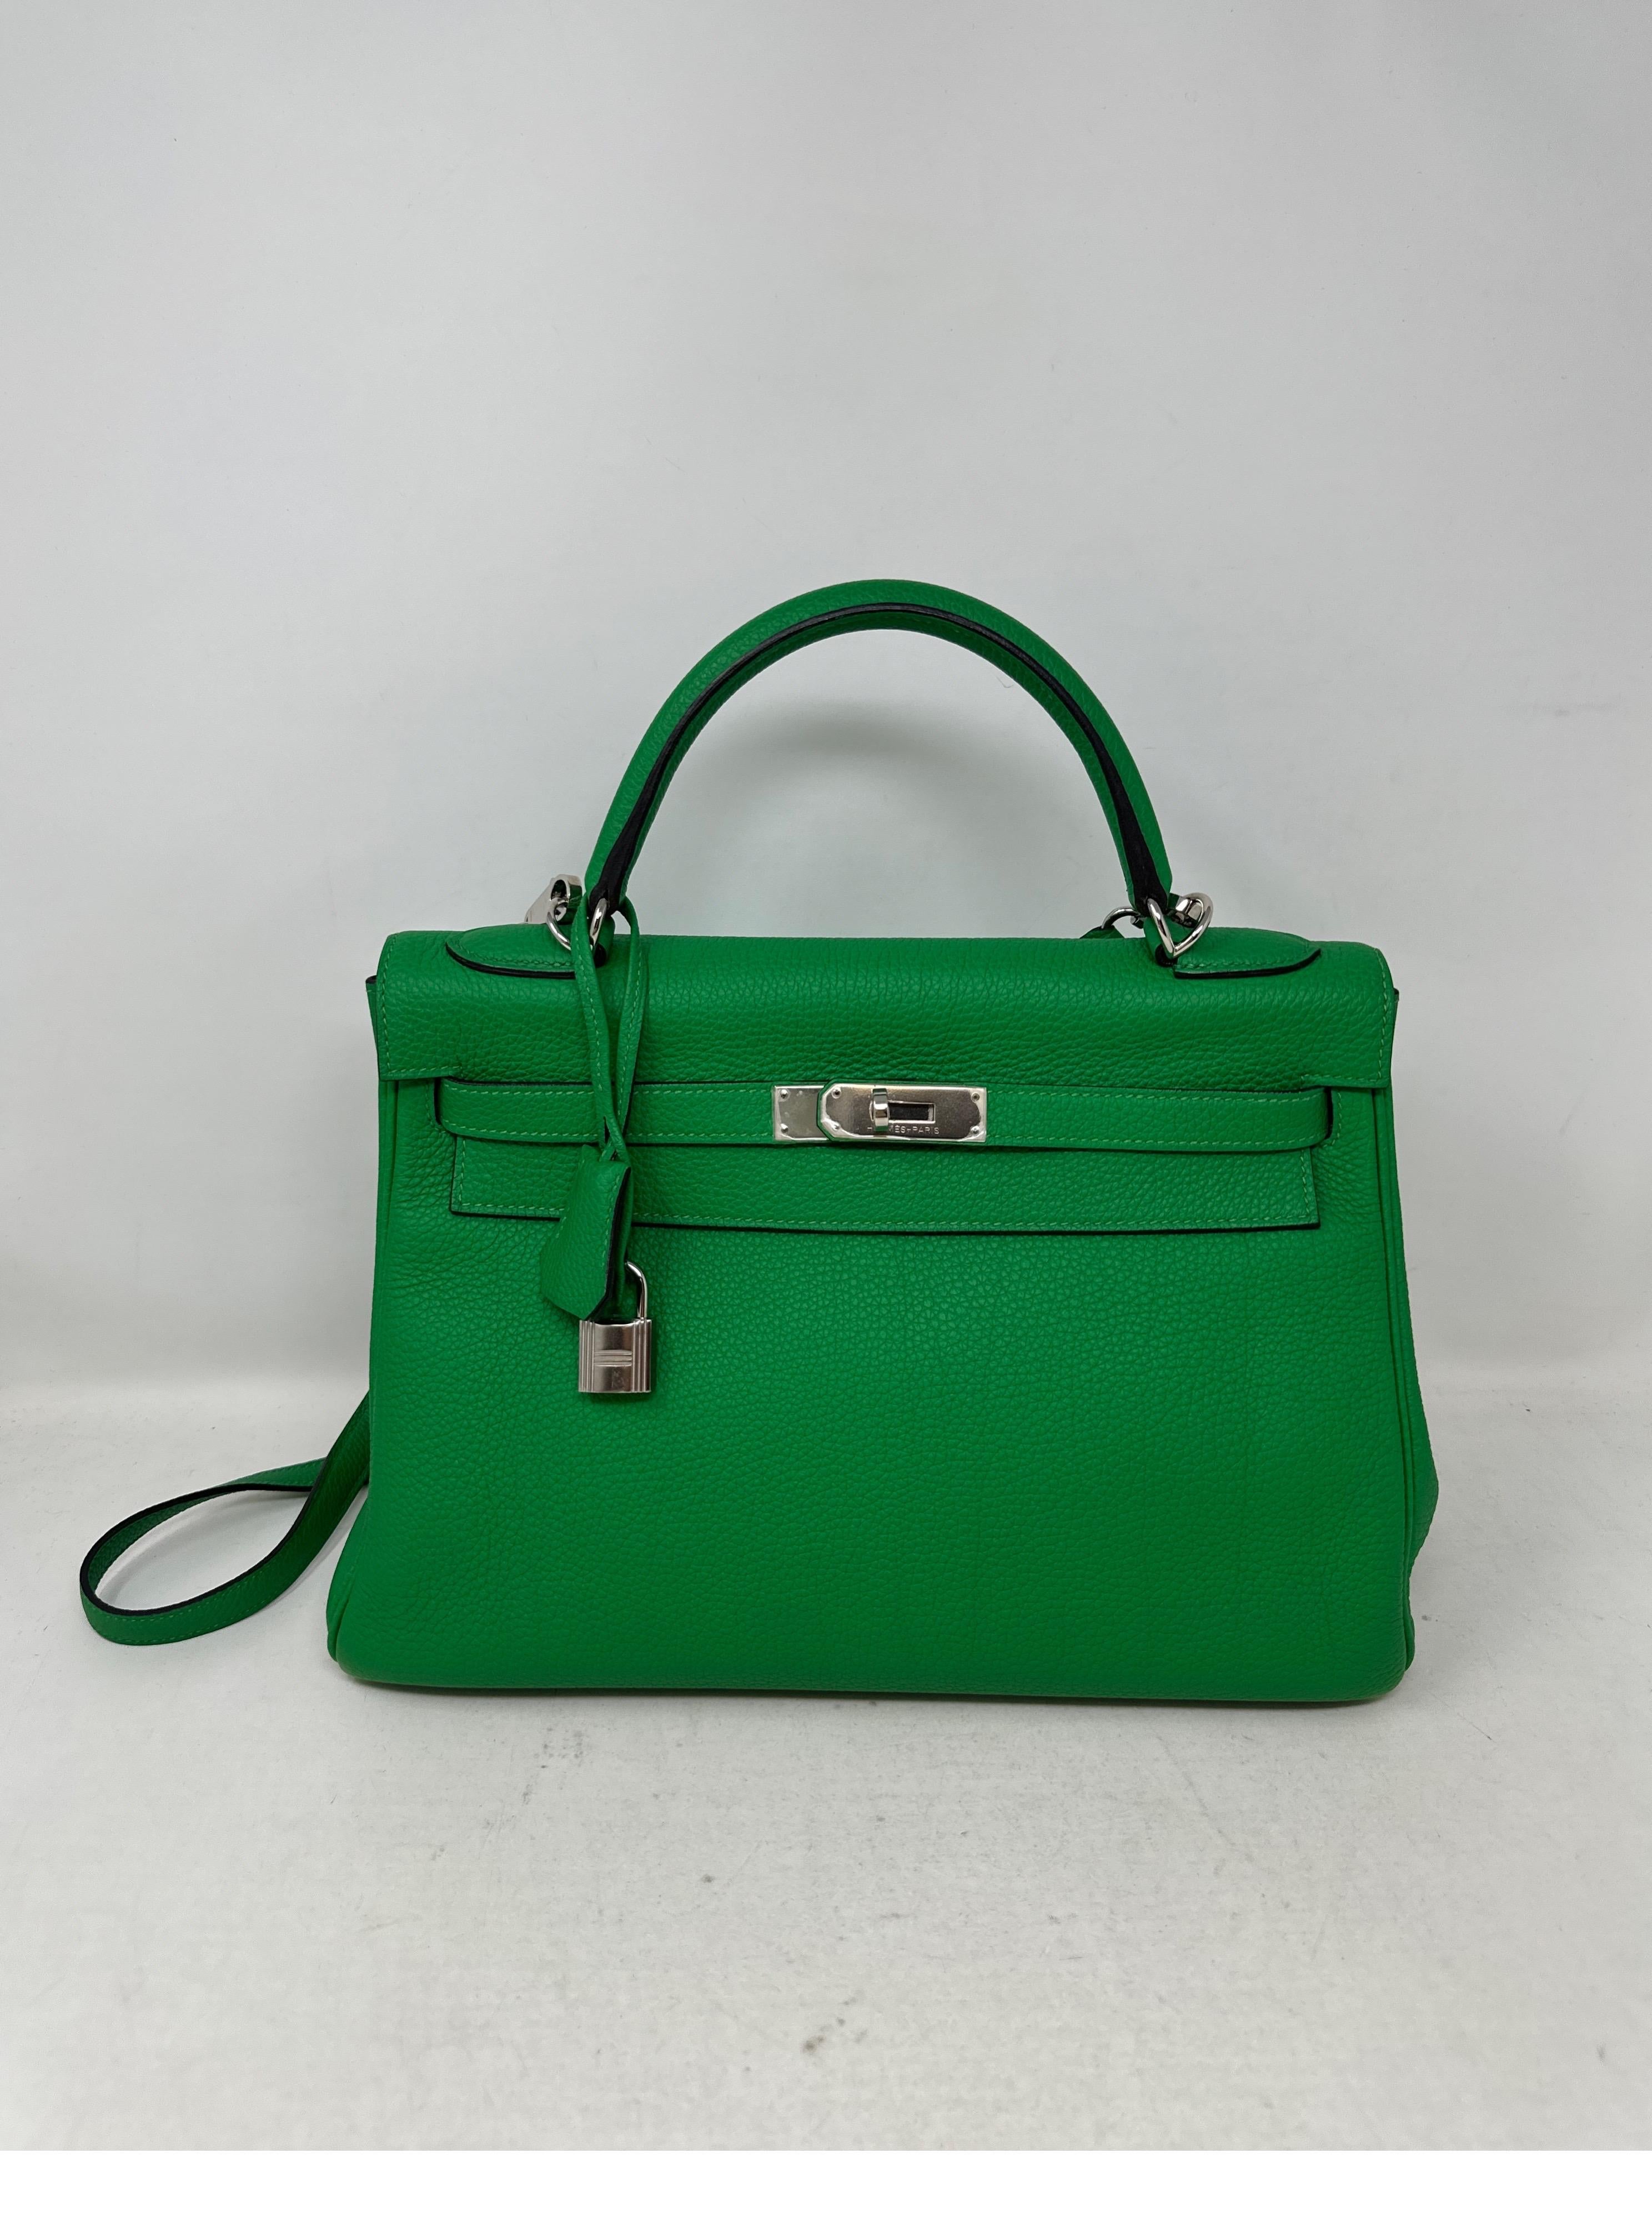 Hermes Bamboo Kelly 35 Bag. Excellent condition. Bamboo green color. Togo leather. Palladium silver hardware. Interior clean. Plastic still on hardware. Includes clcohette, lock, keys, and dust bag. Guaranteed authentic. 